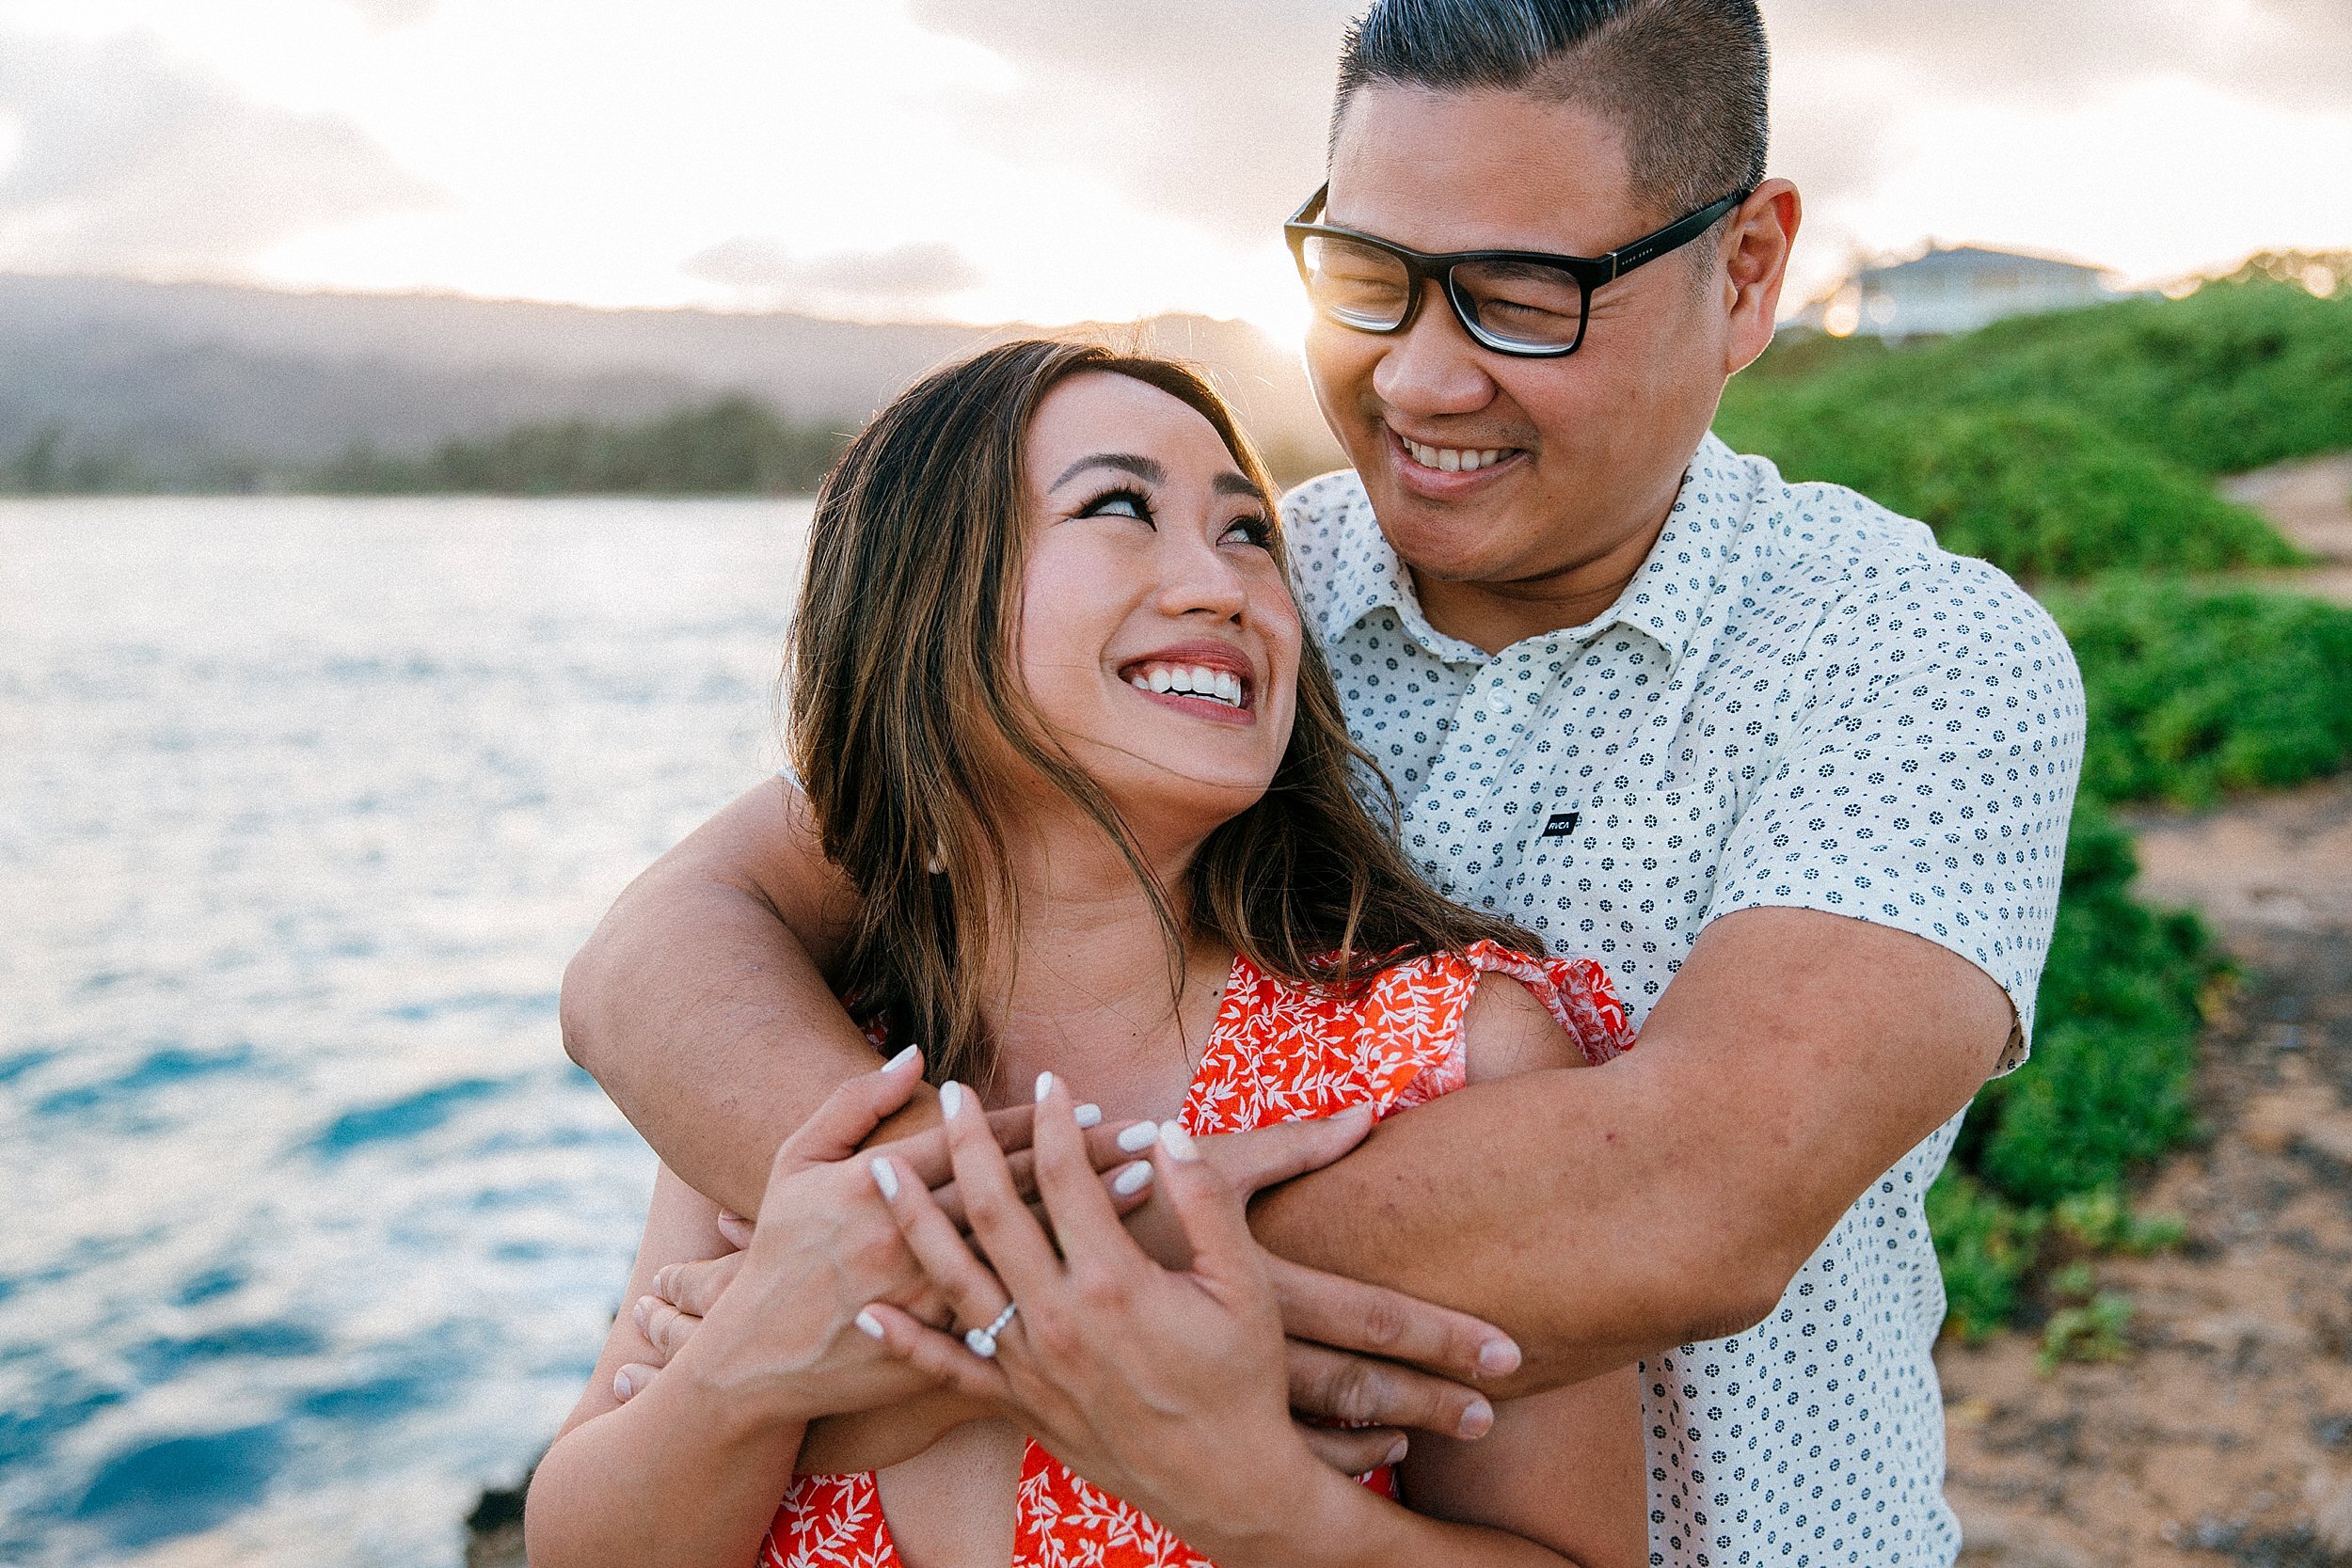 laie-point-cliffside-engagement-session-oahu-hawaii_0008.jpg